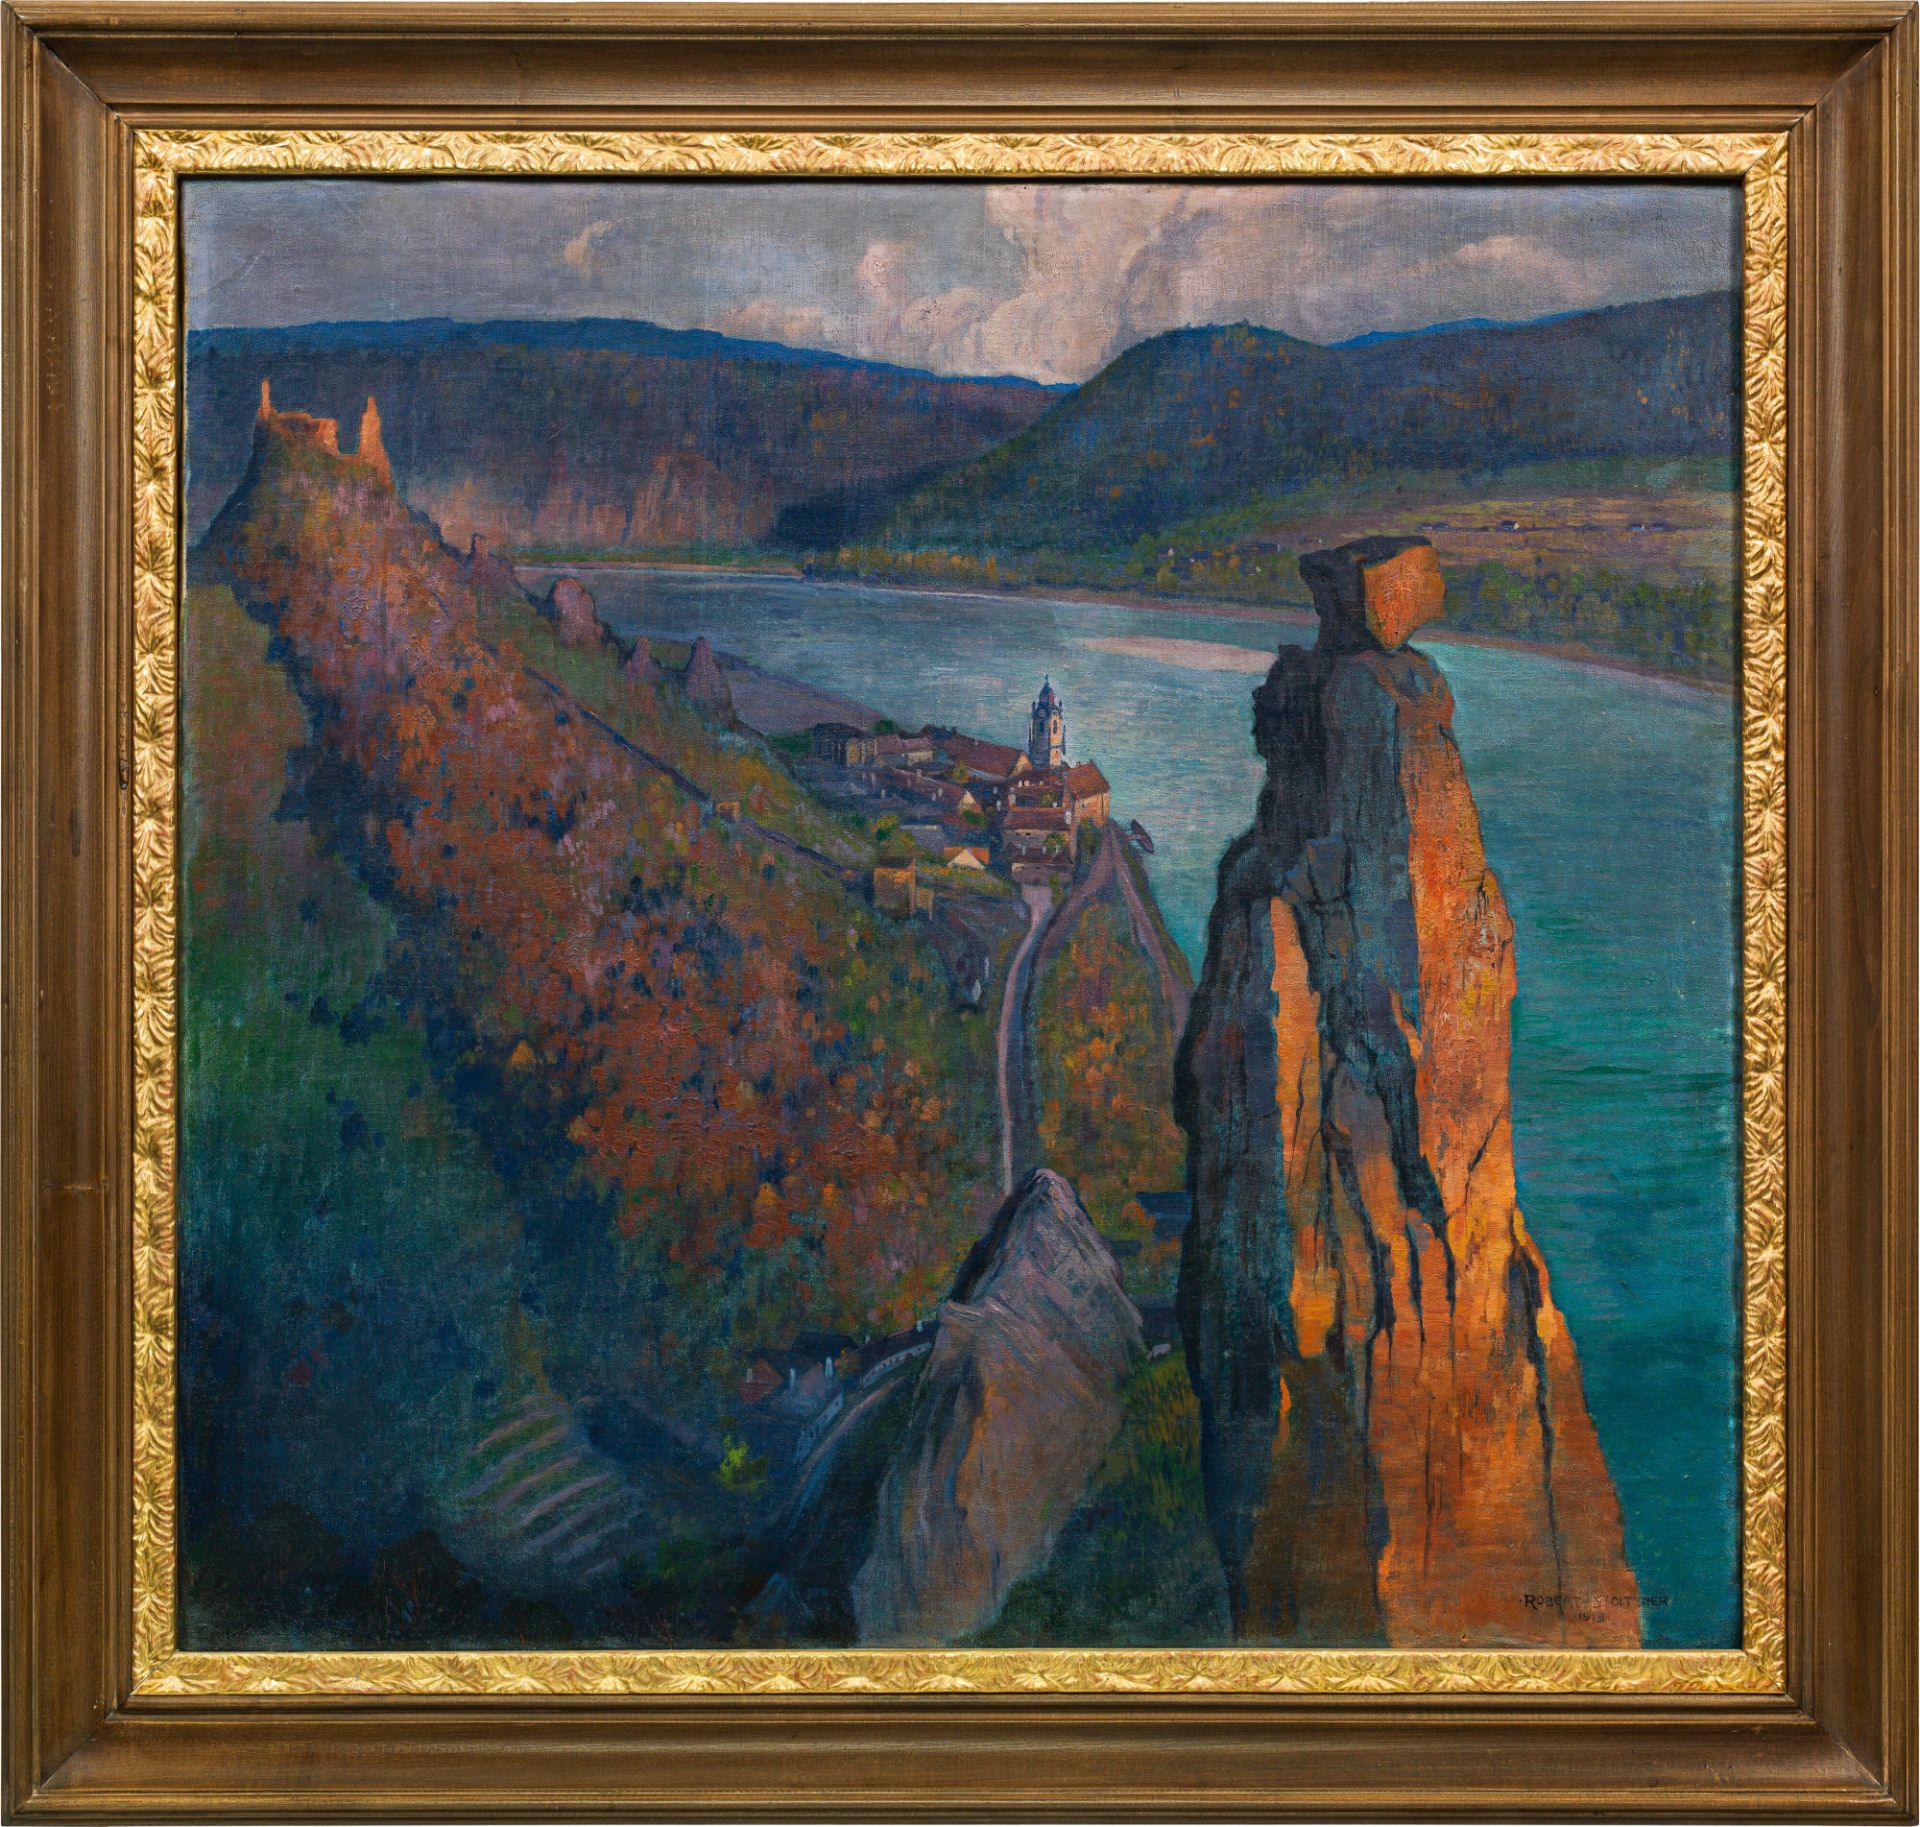 Robert StoitznerThe Wächter at Dürnstein1919oil on canvas; framed96 x 102 cmsigned and dated on - Image 2 of 3